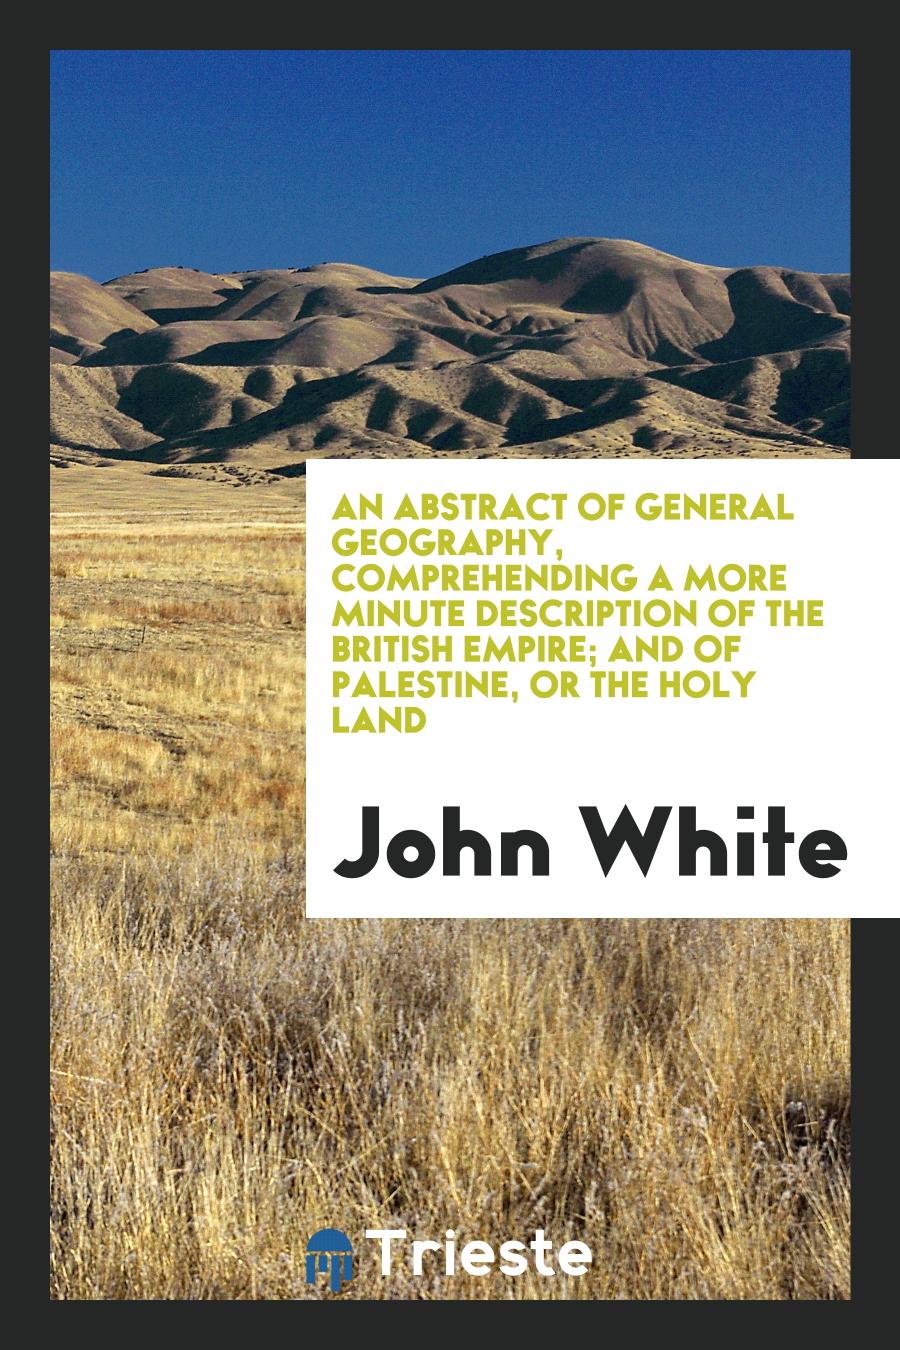 An abstract of general geography, comprehending a more minute description of the British Empire; and of Palestine, or the Holy Land